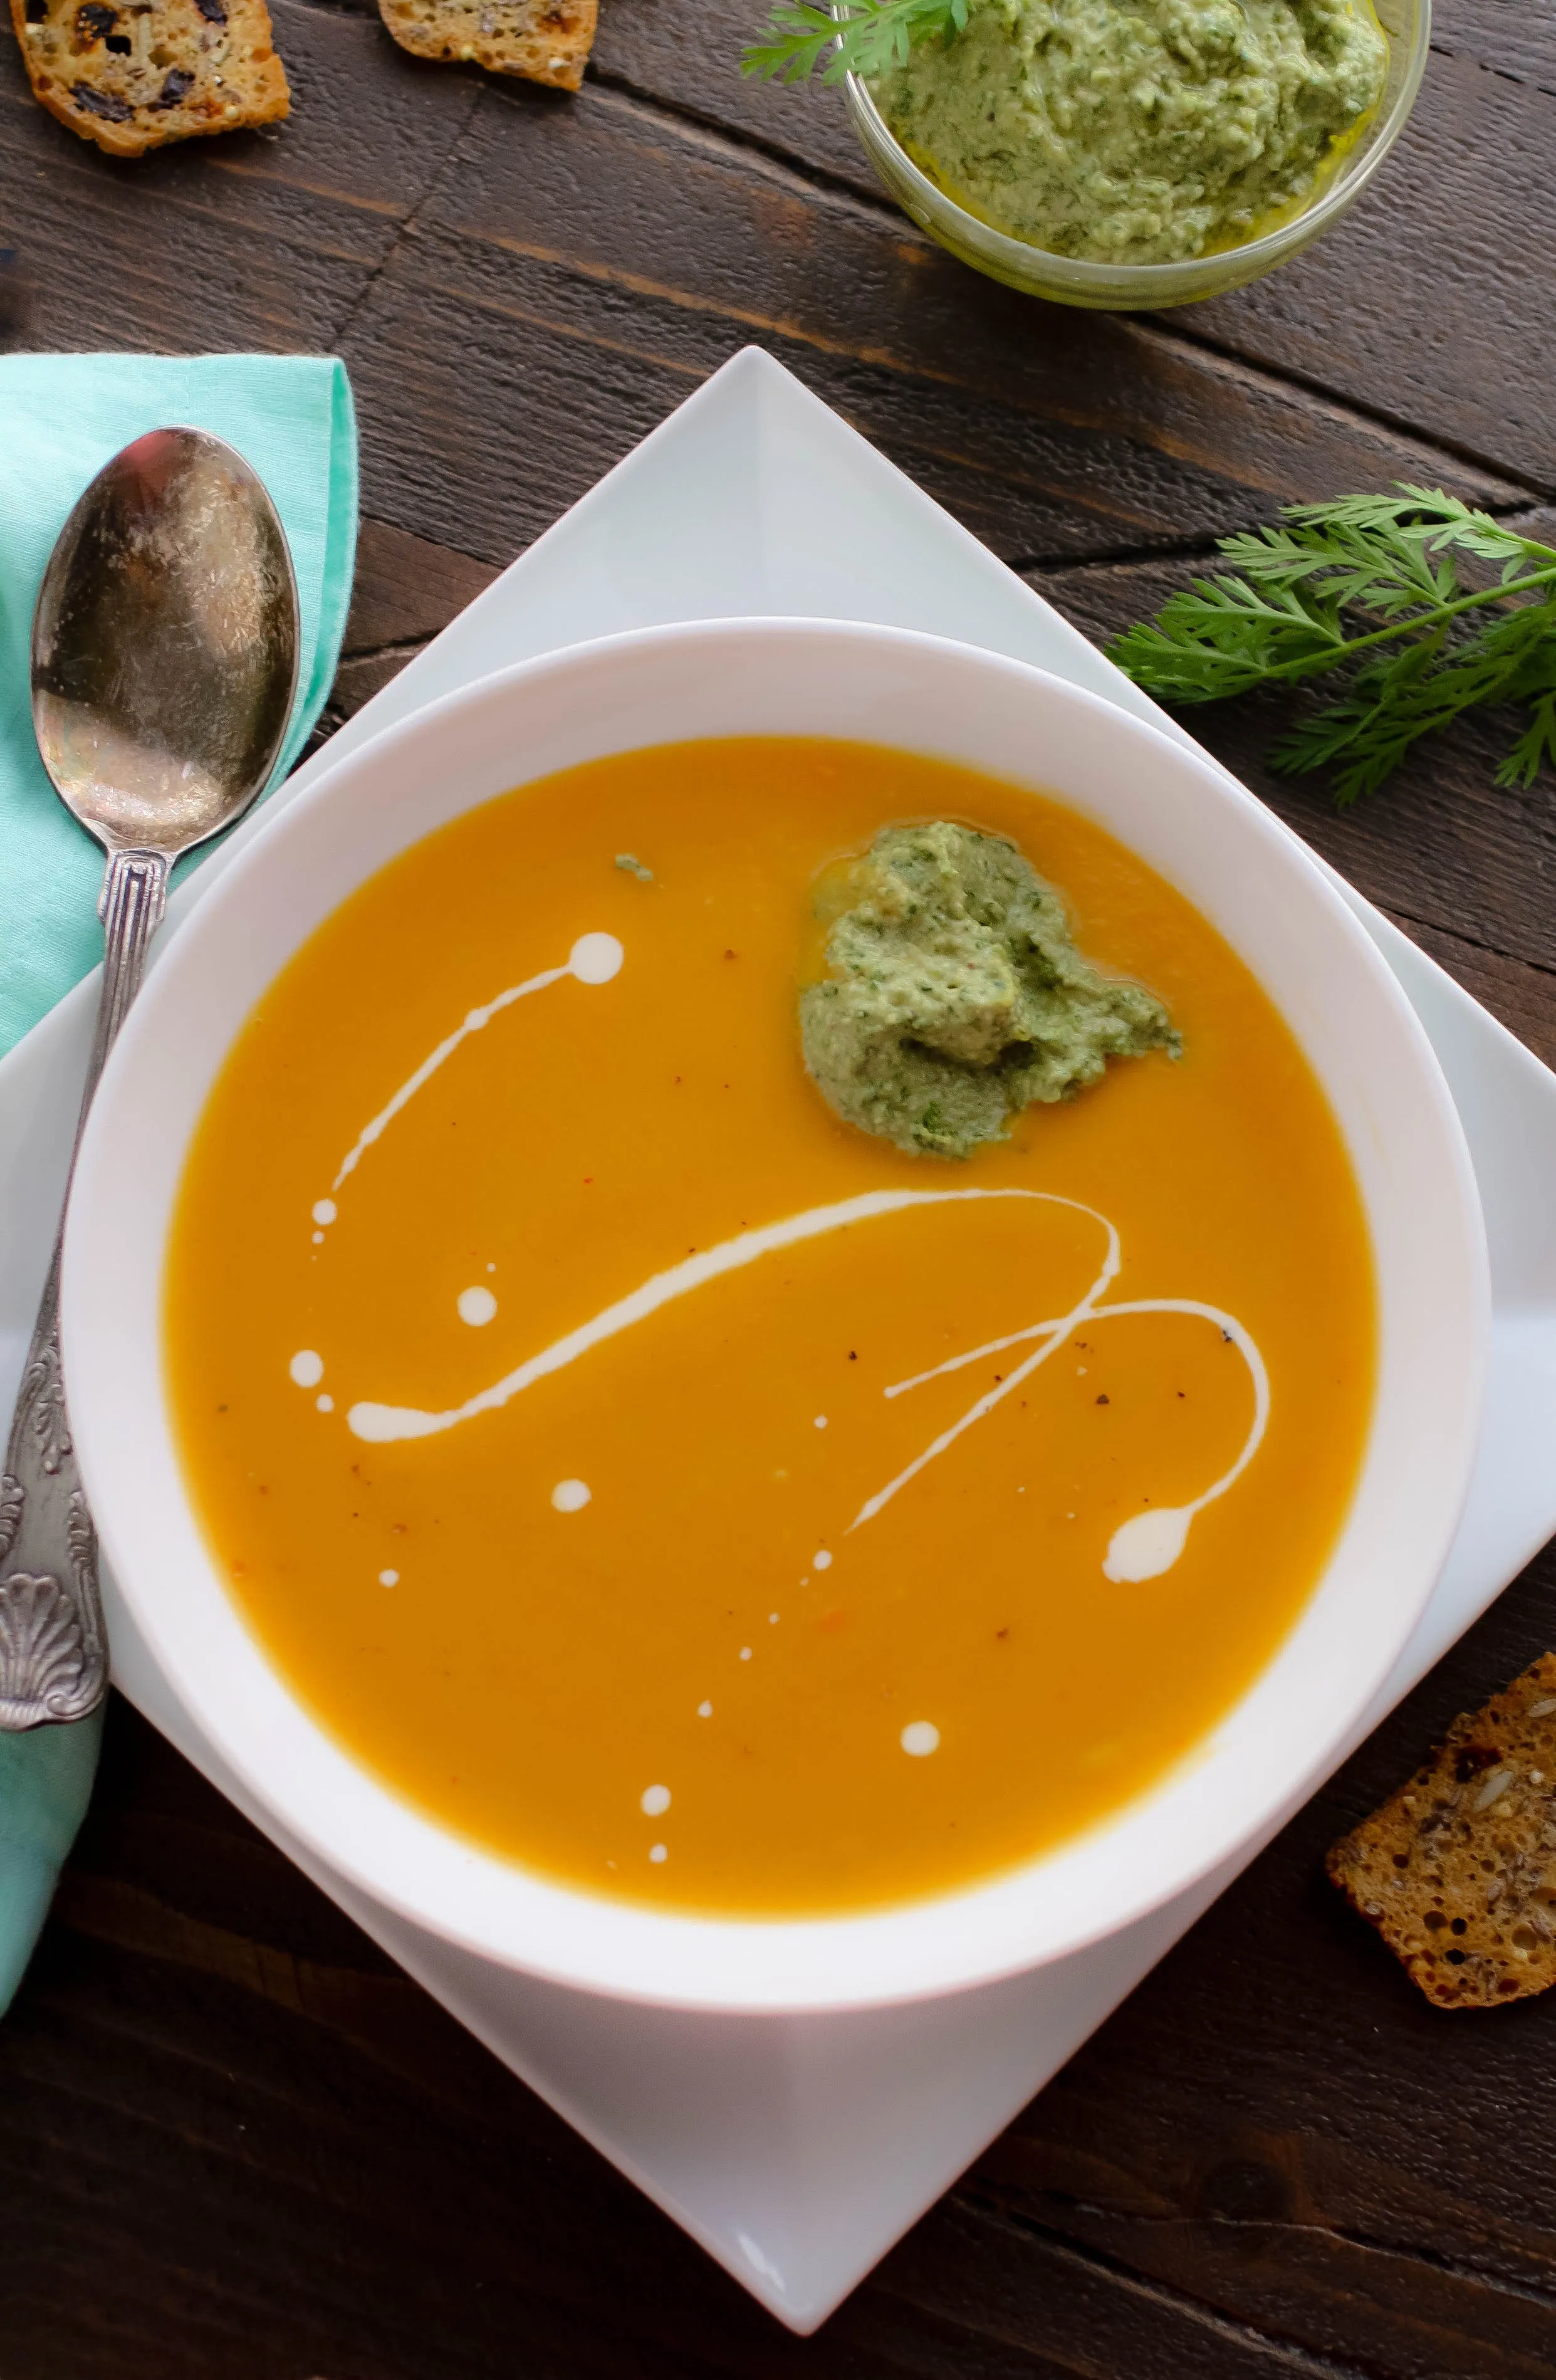 Roasted Carrot and Parsnip Soup with Carrot Greens Pesto is a tasty soup that is so easy to make! You'll love Roasted Carrot and Parsnip Soup with Carrot Greens Pesto for the creamy soup it is.